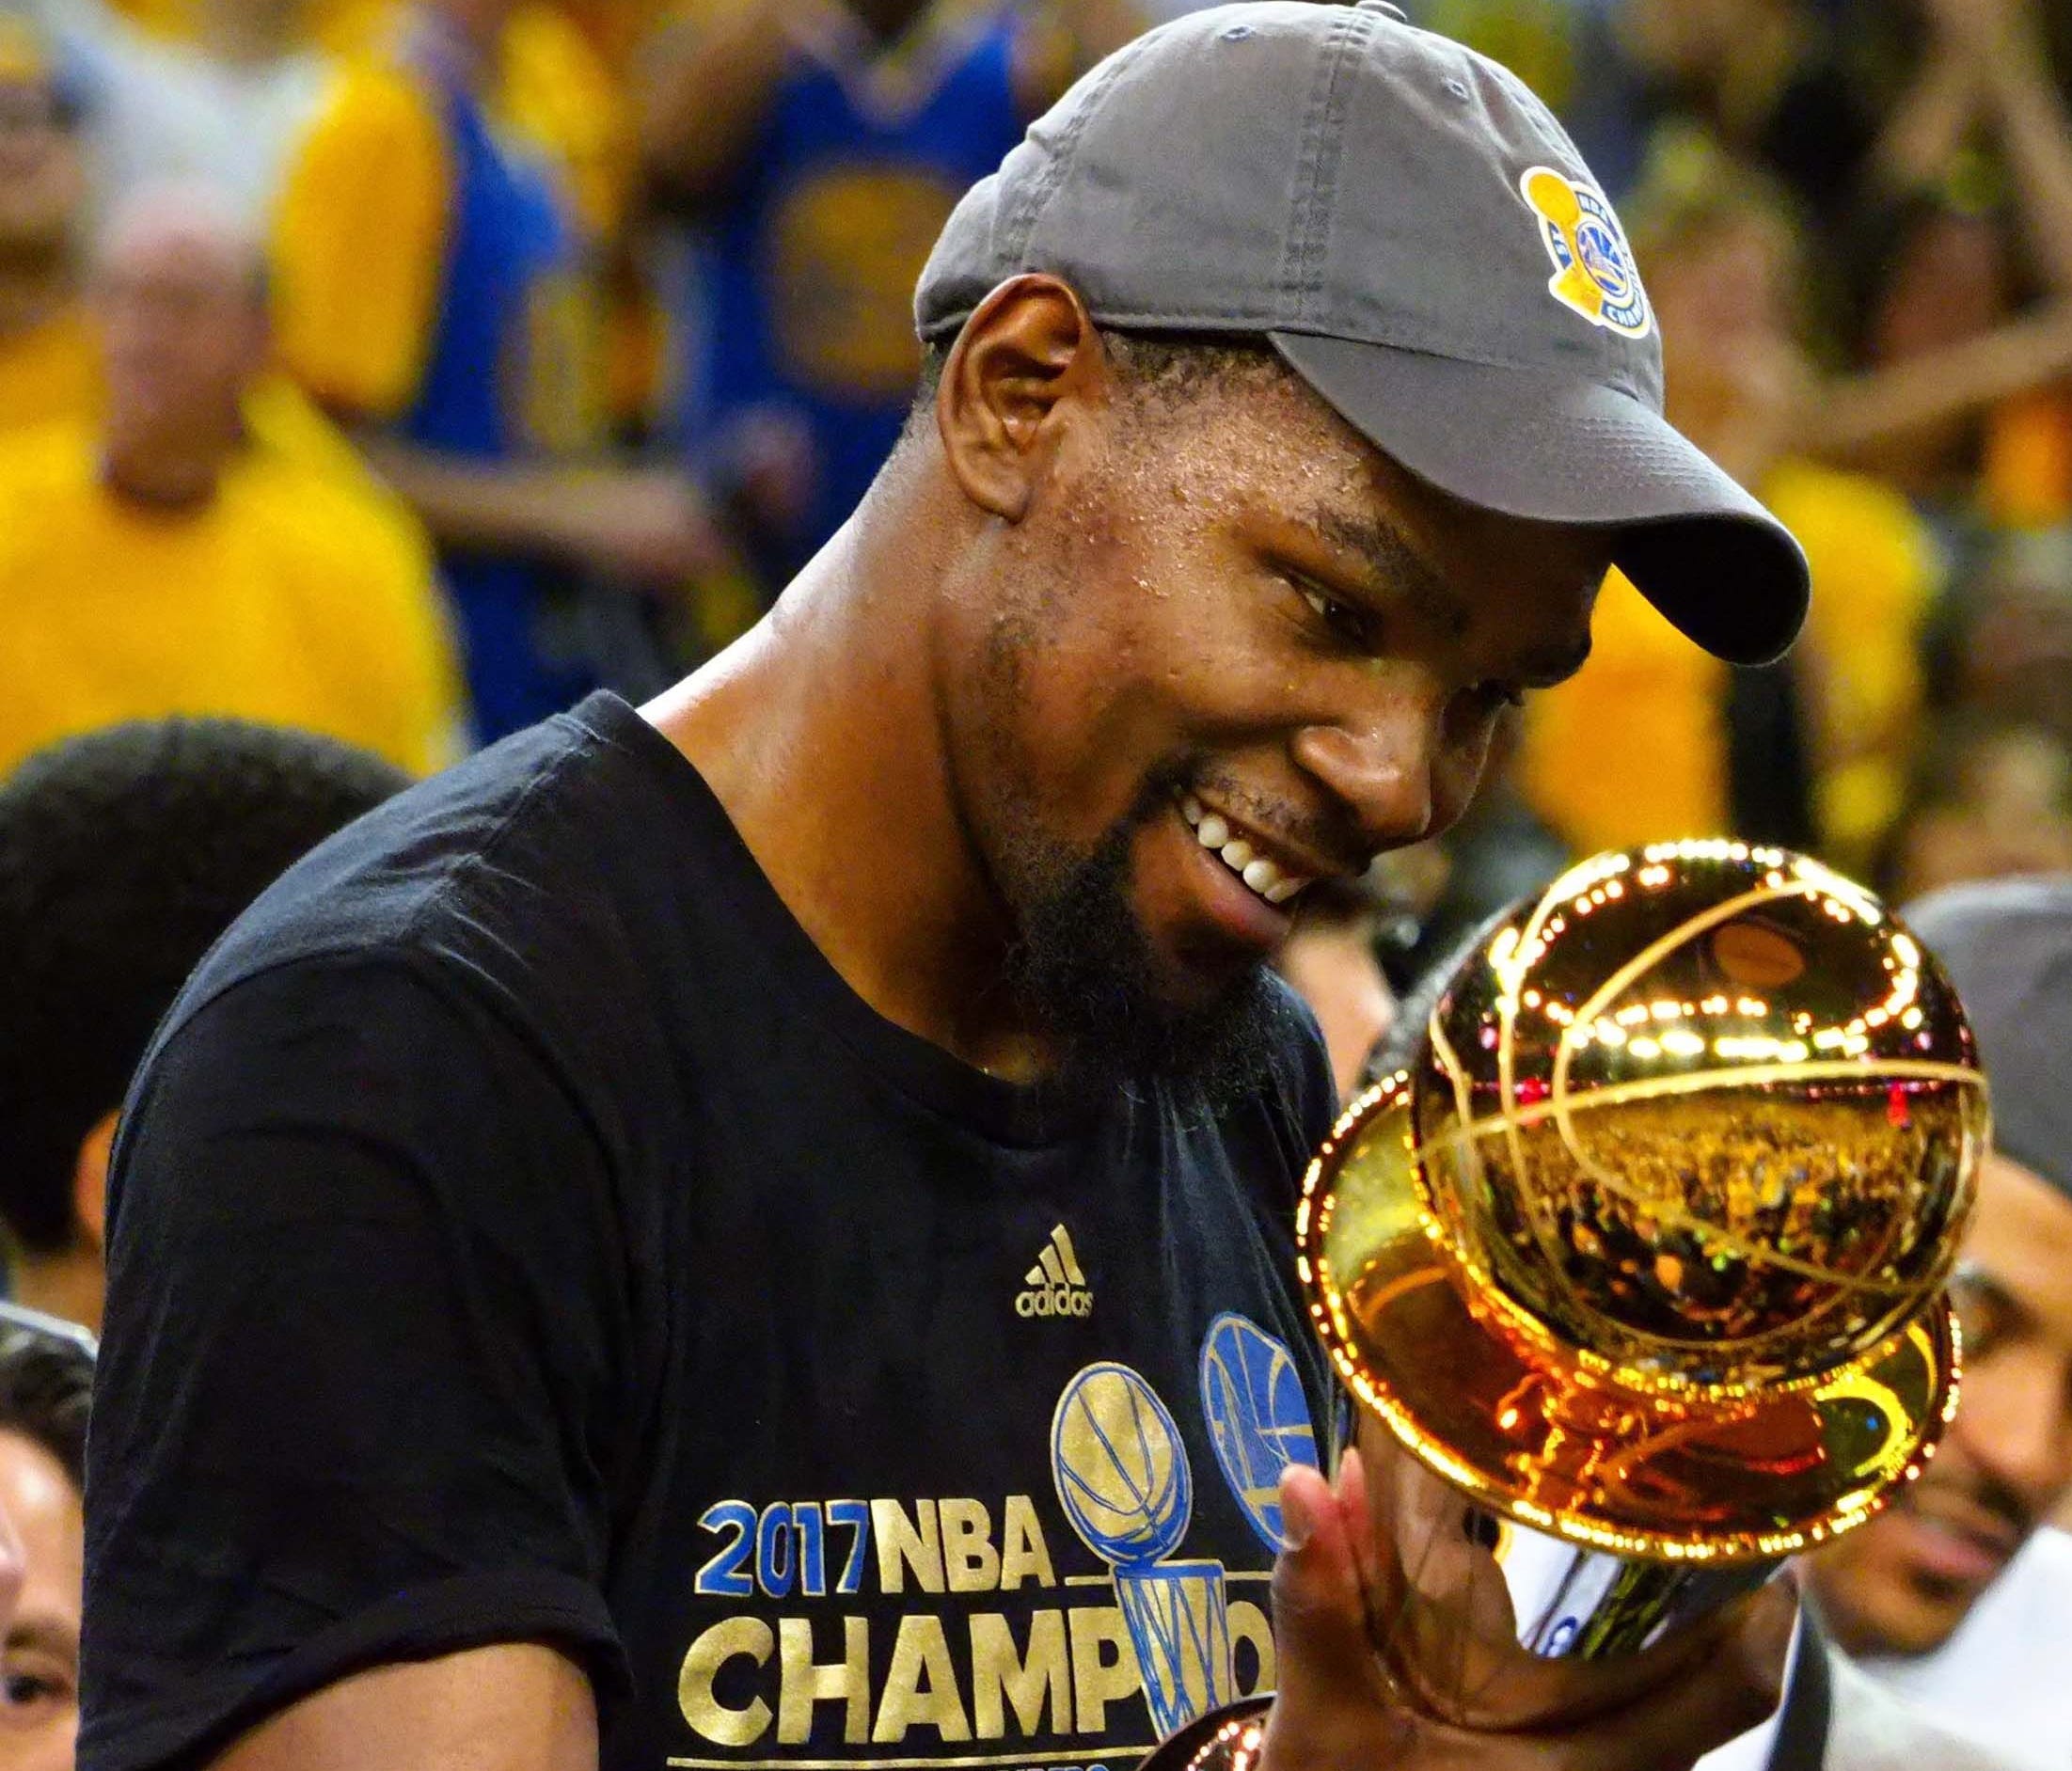 Durant averaged 28.5 points in the playoffs.